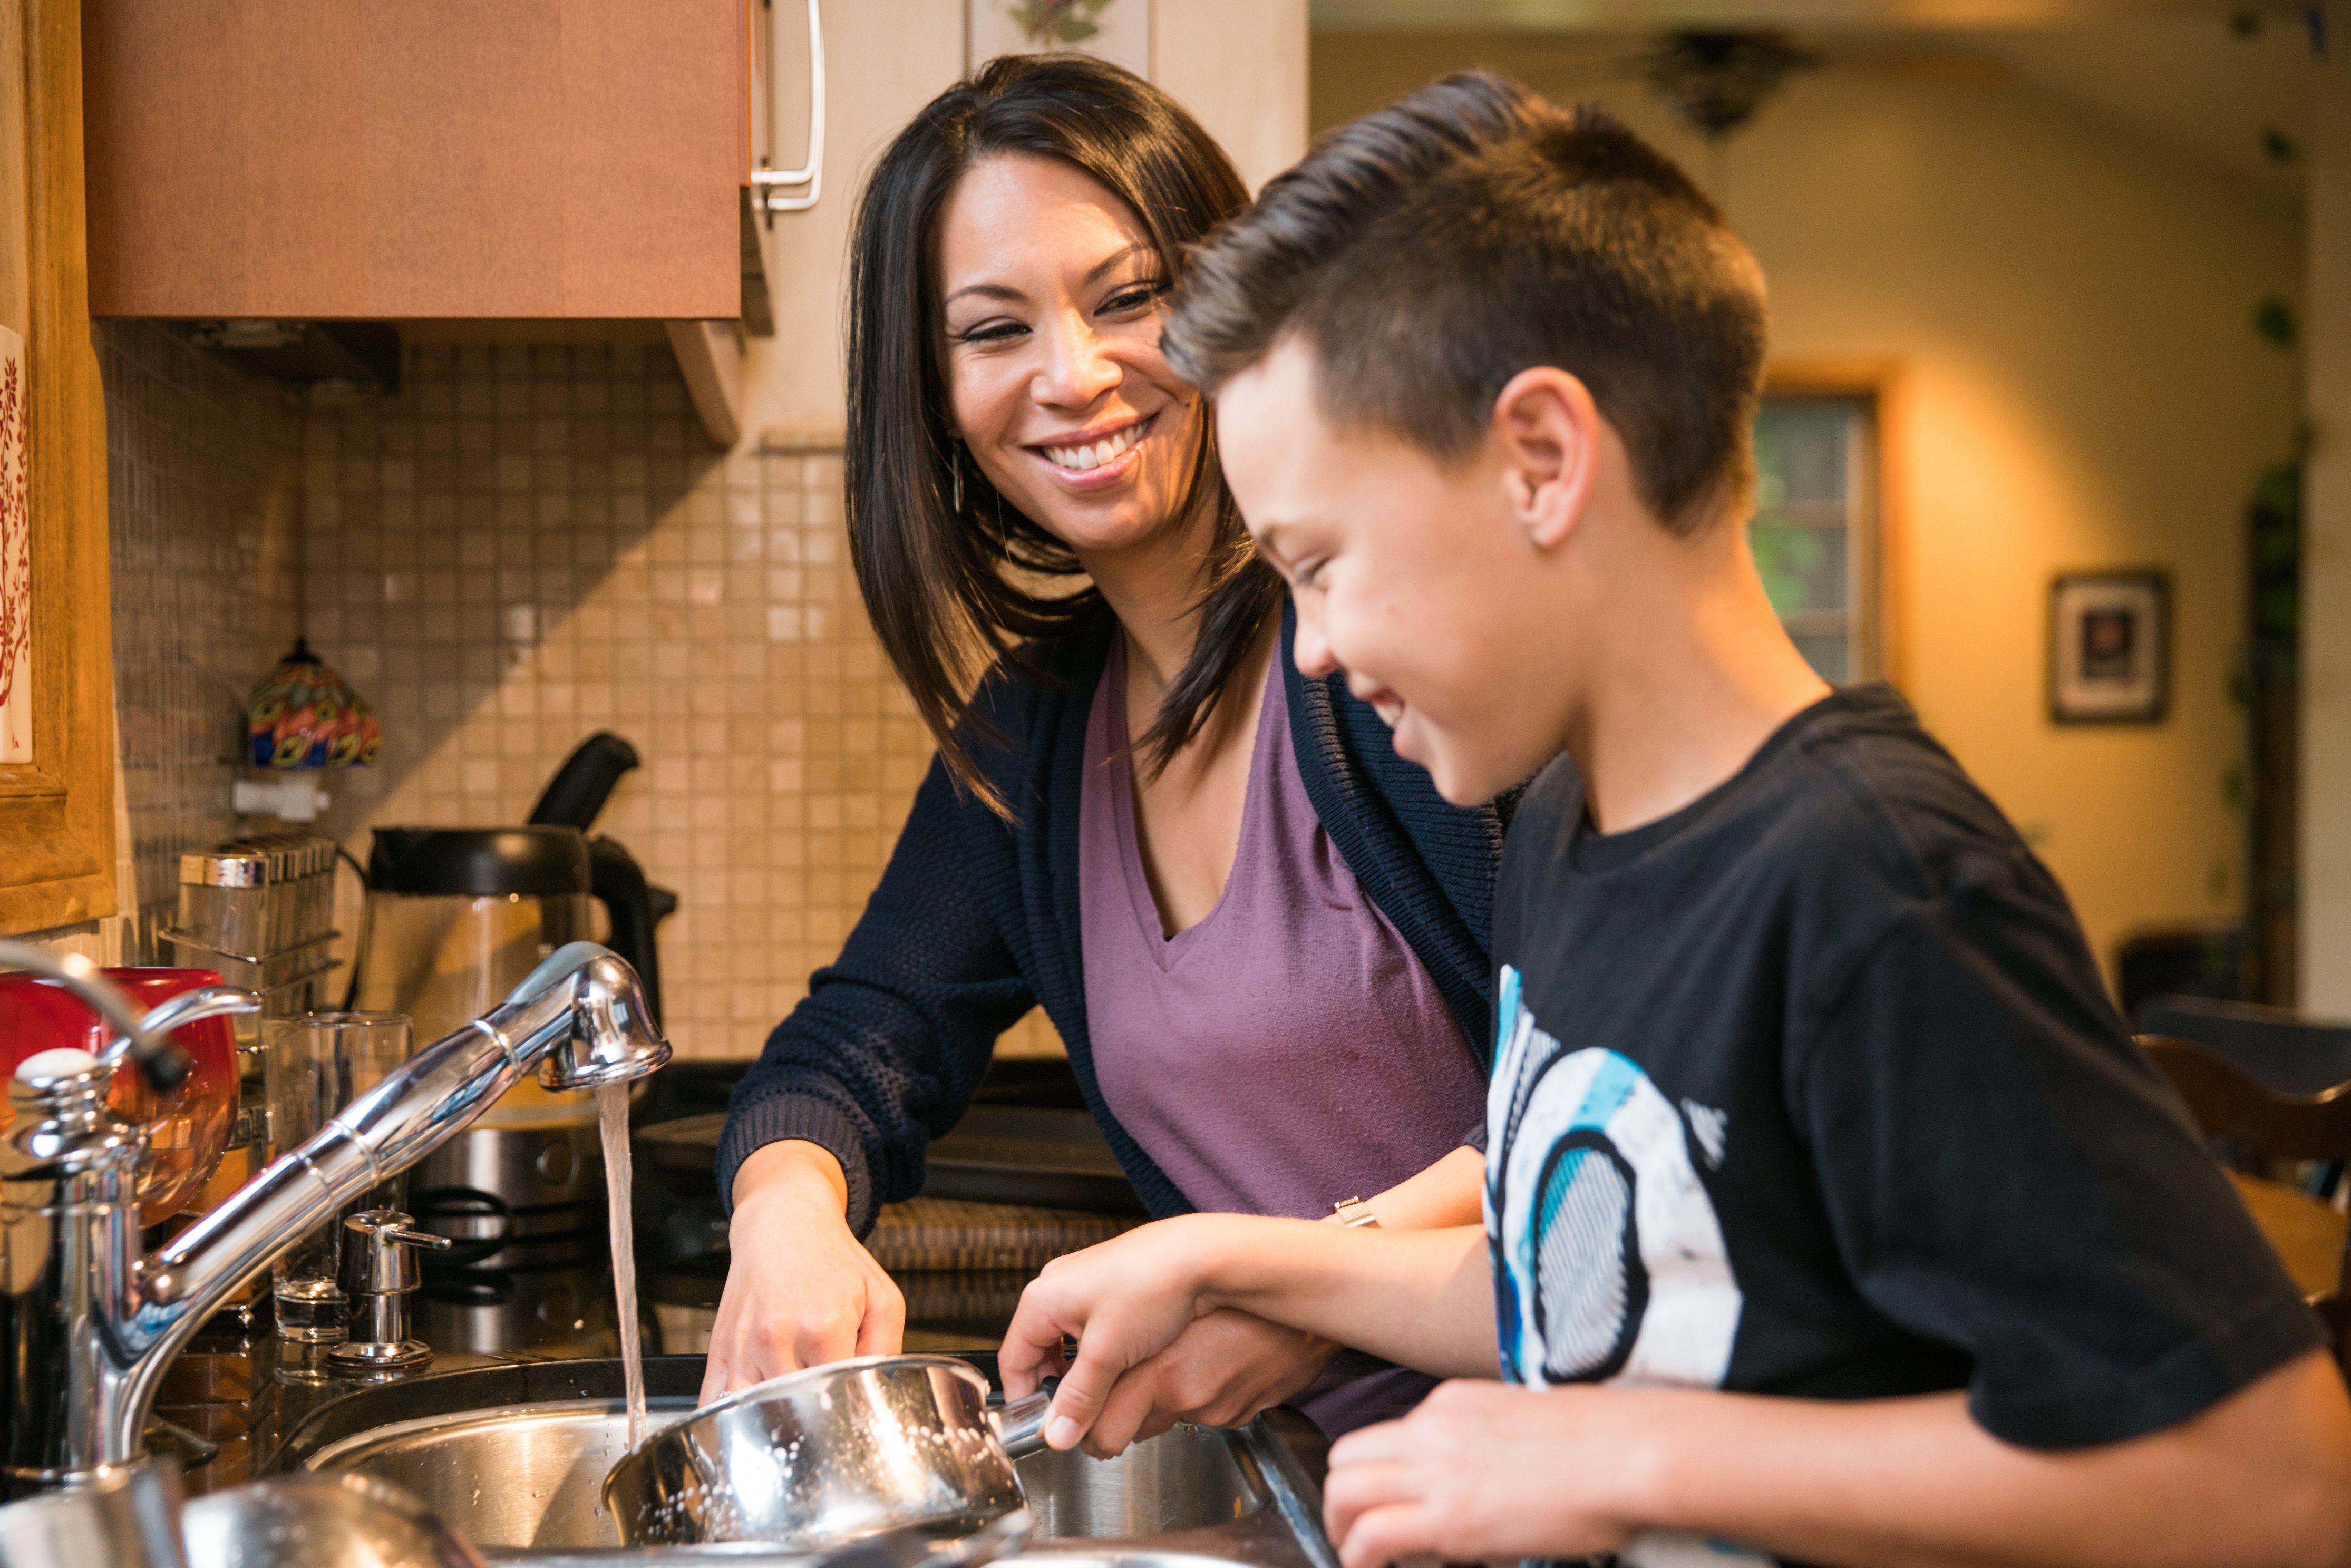 Your needs matter most during a kitchen remodel. Remember your priorities to design a layout that will work best. This mother and son are washing dishes togather and enjoying time together as a family in their newly remodeled kitchen.